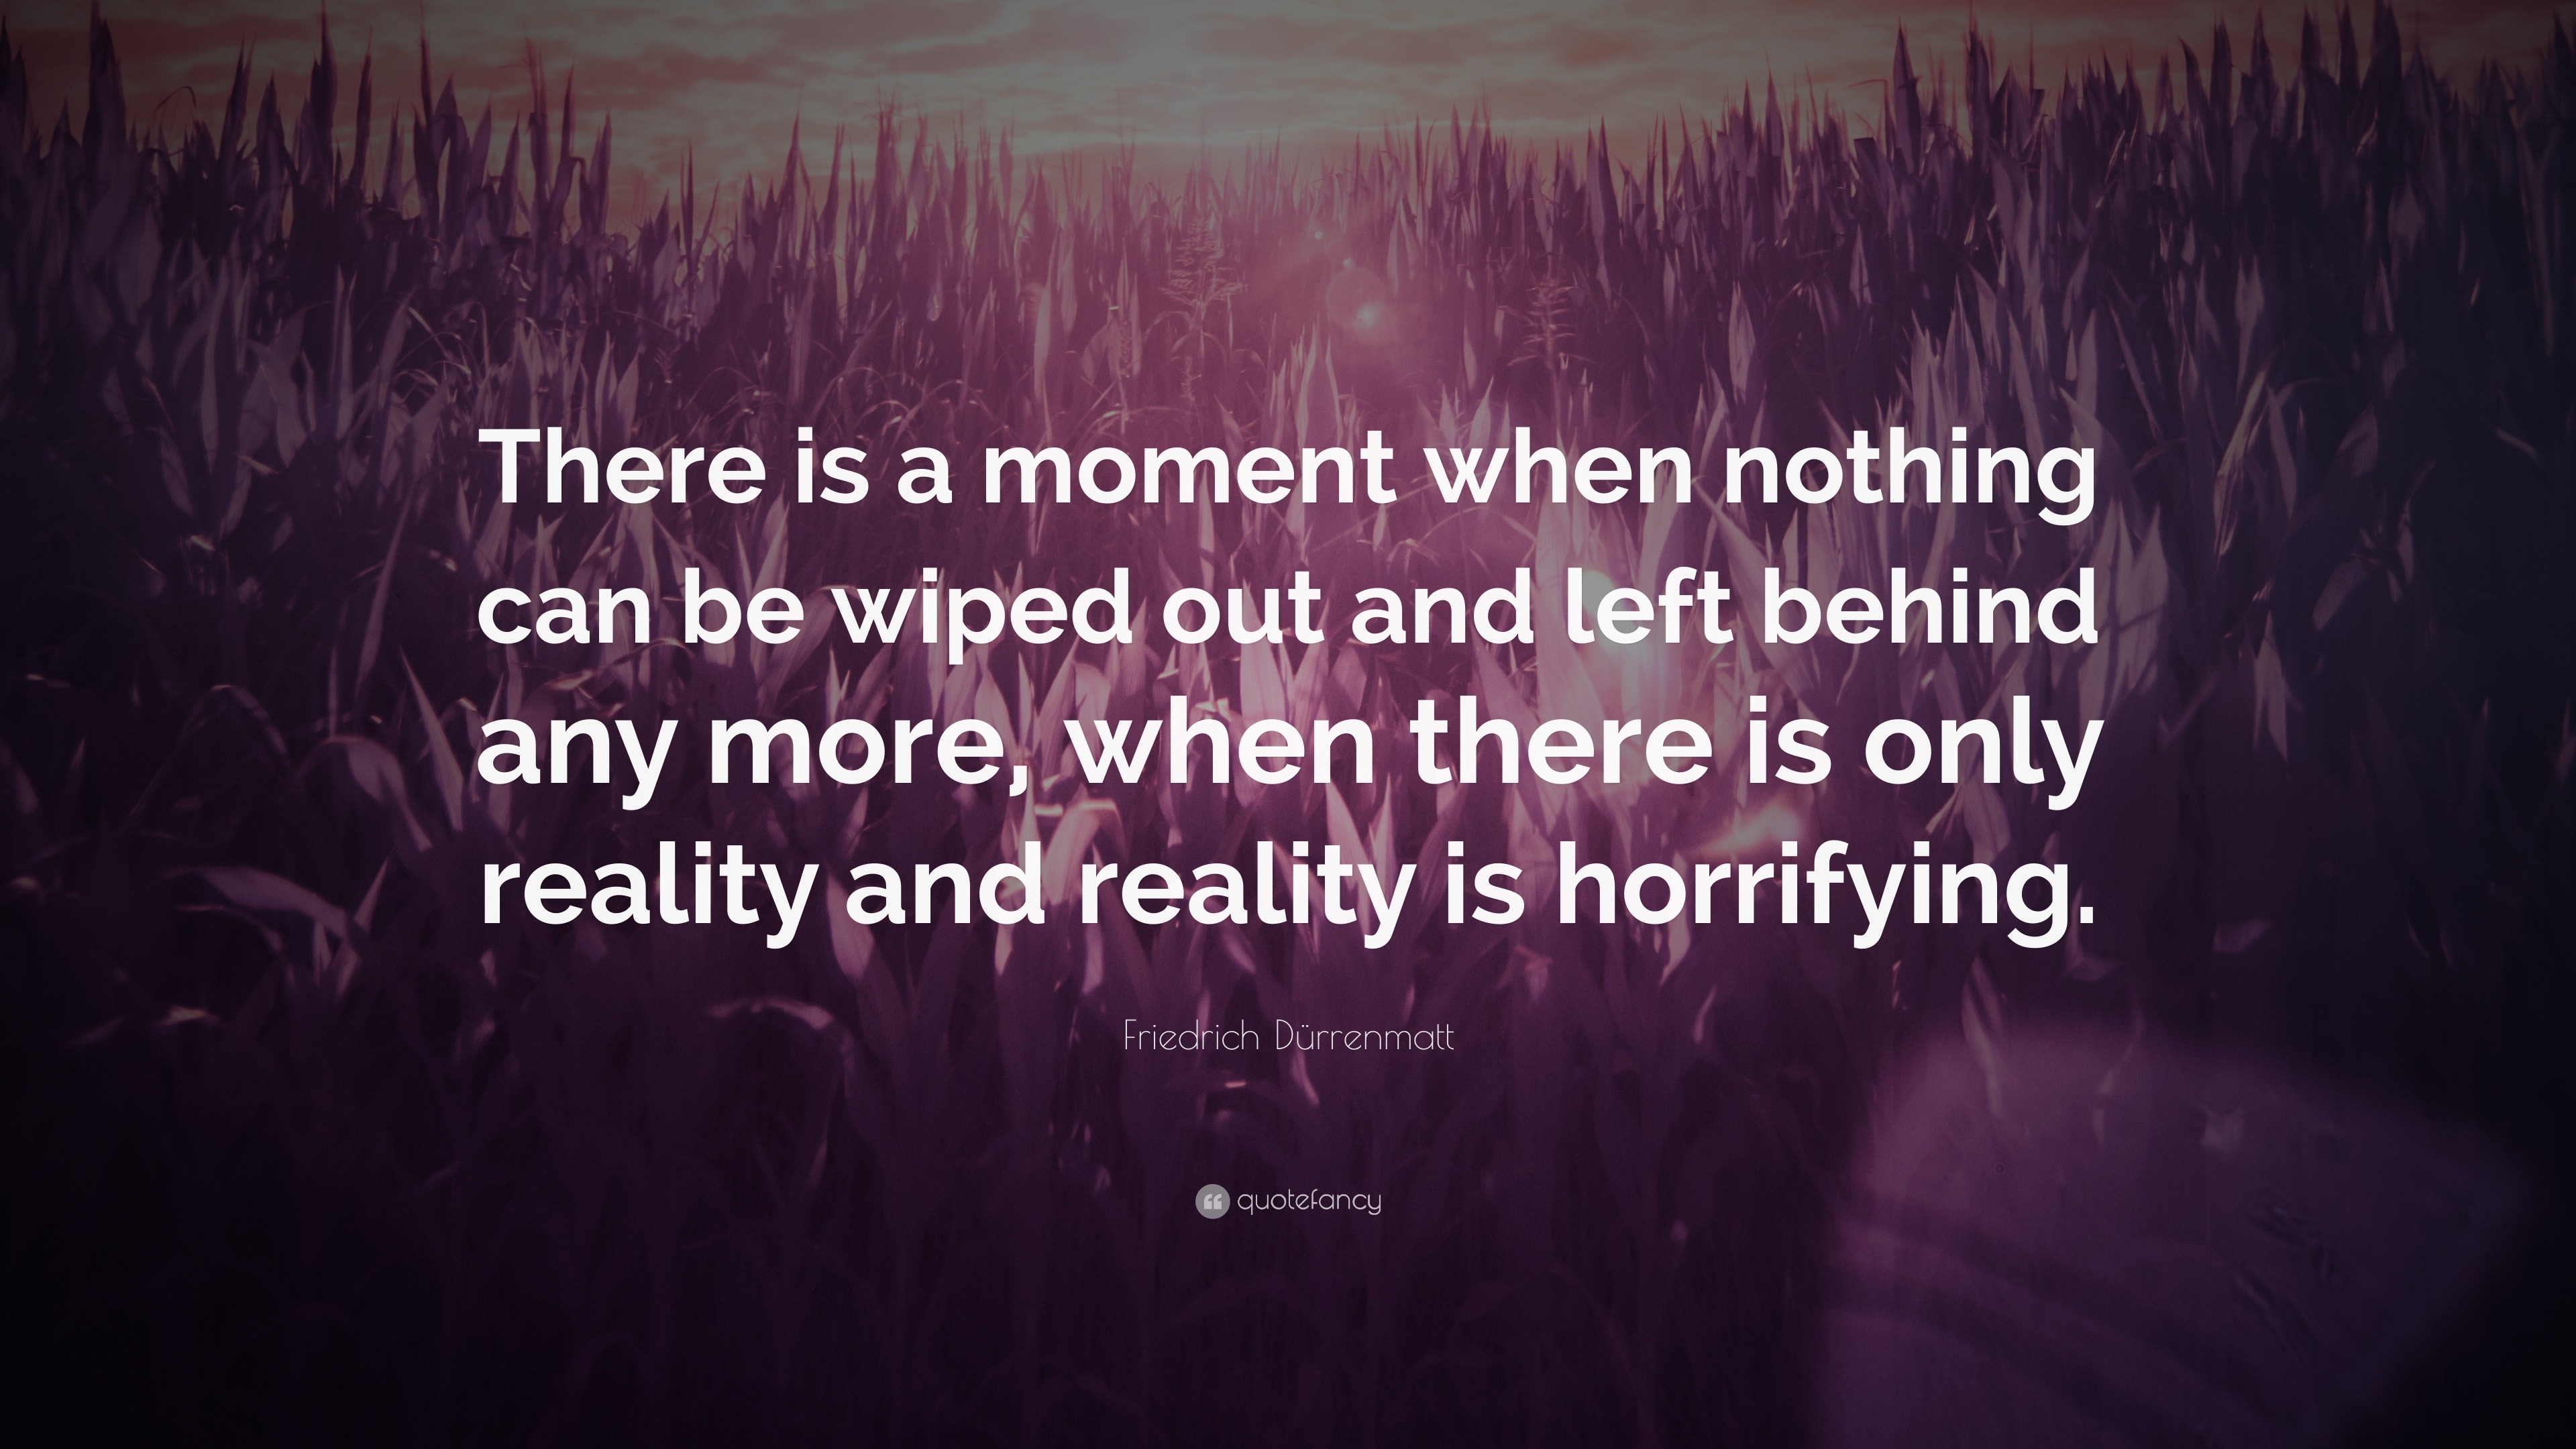 Friedrich Dürrenmatt Quote: “There is a moment when nothing can be ...